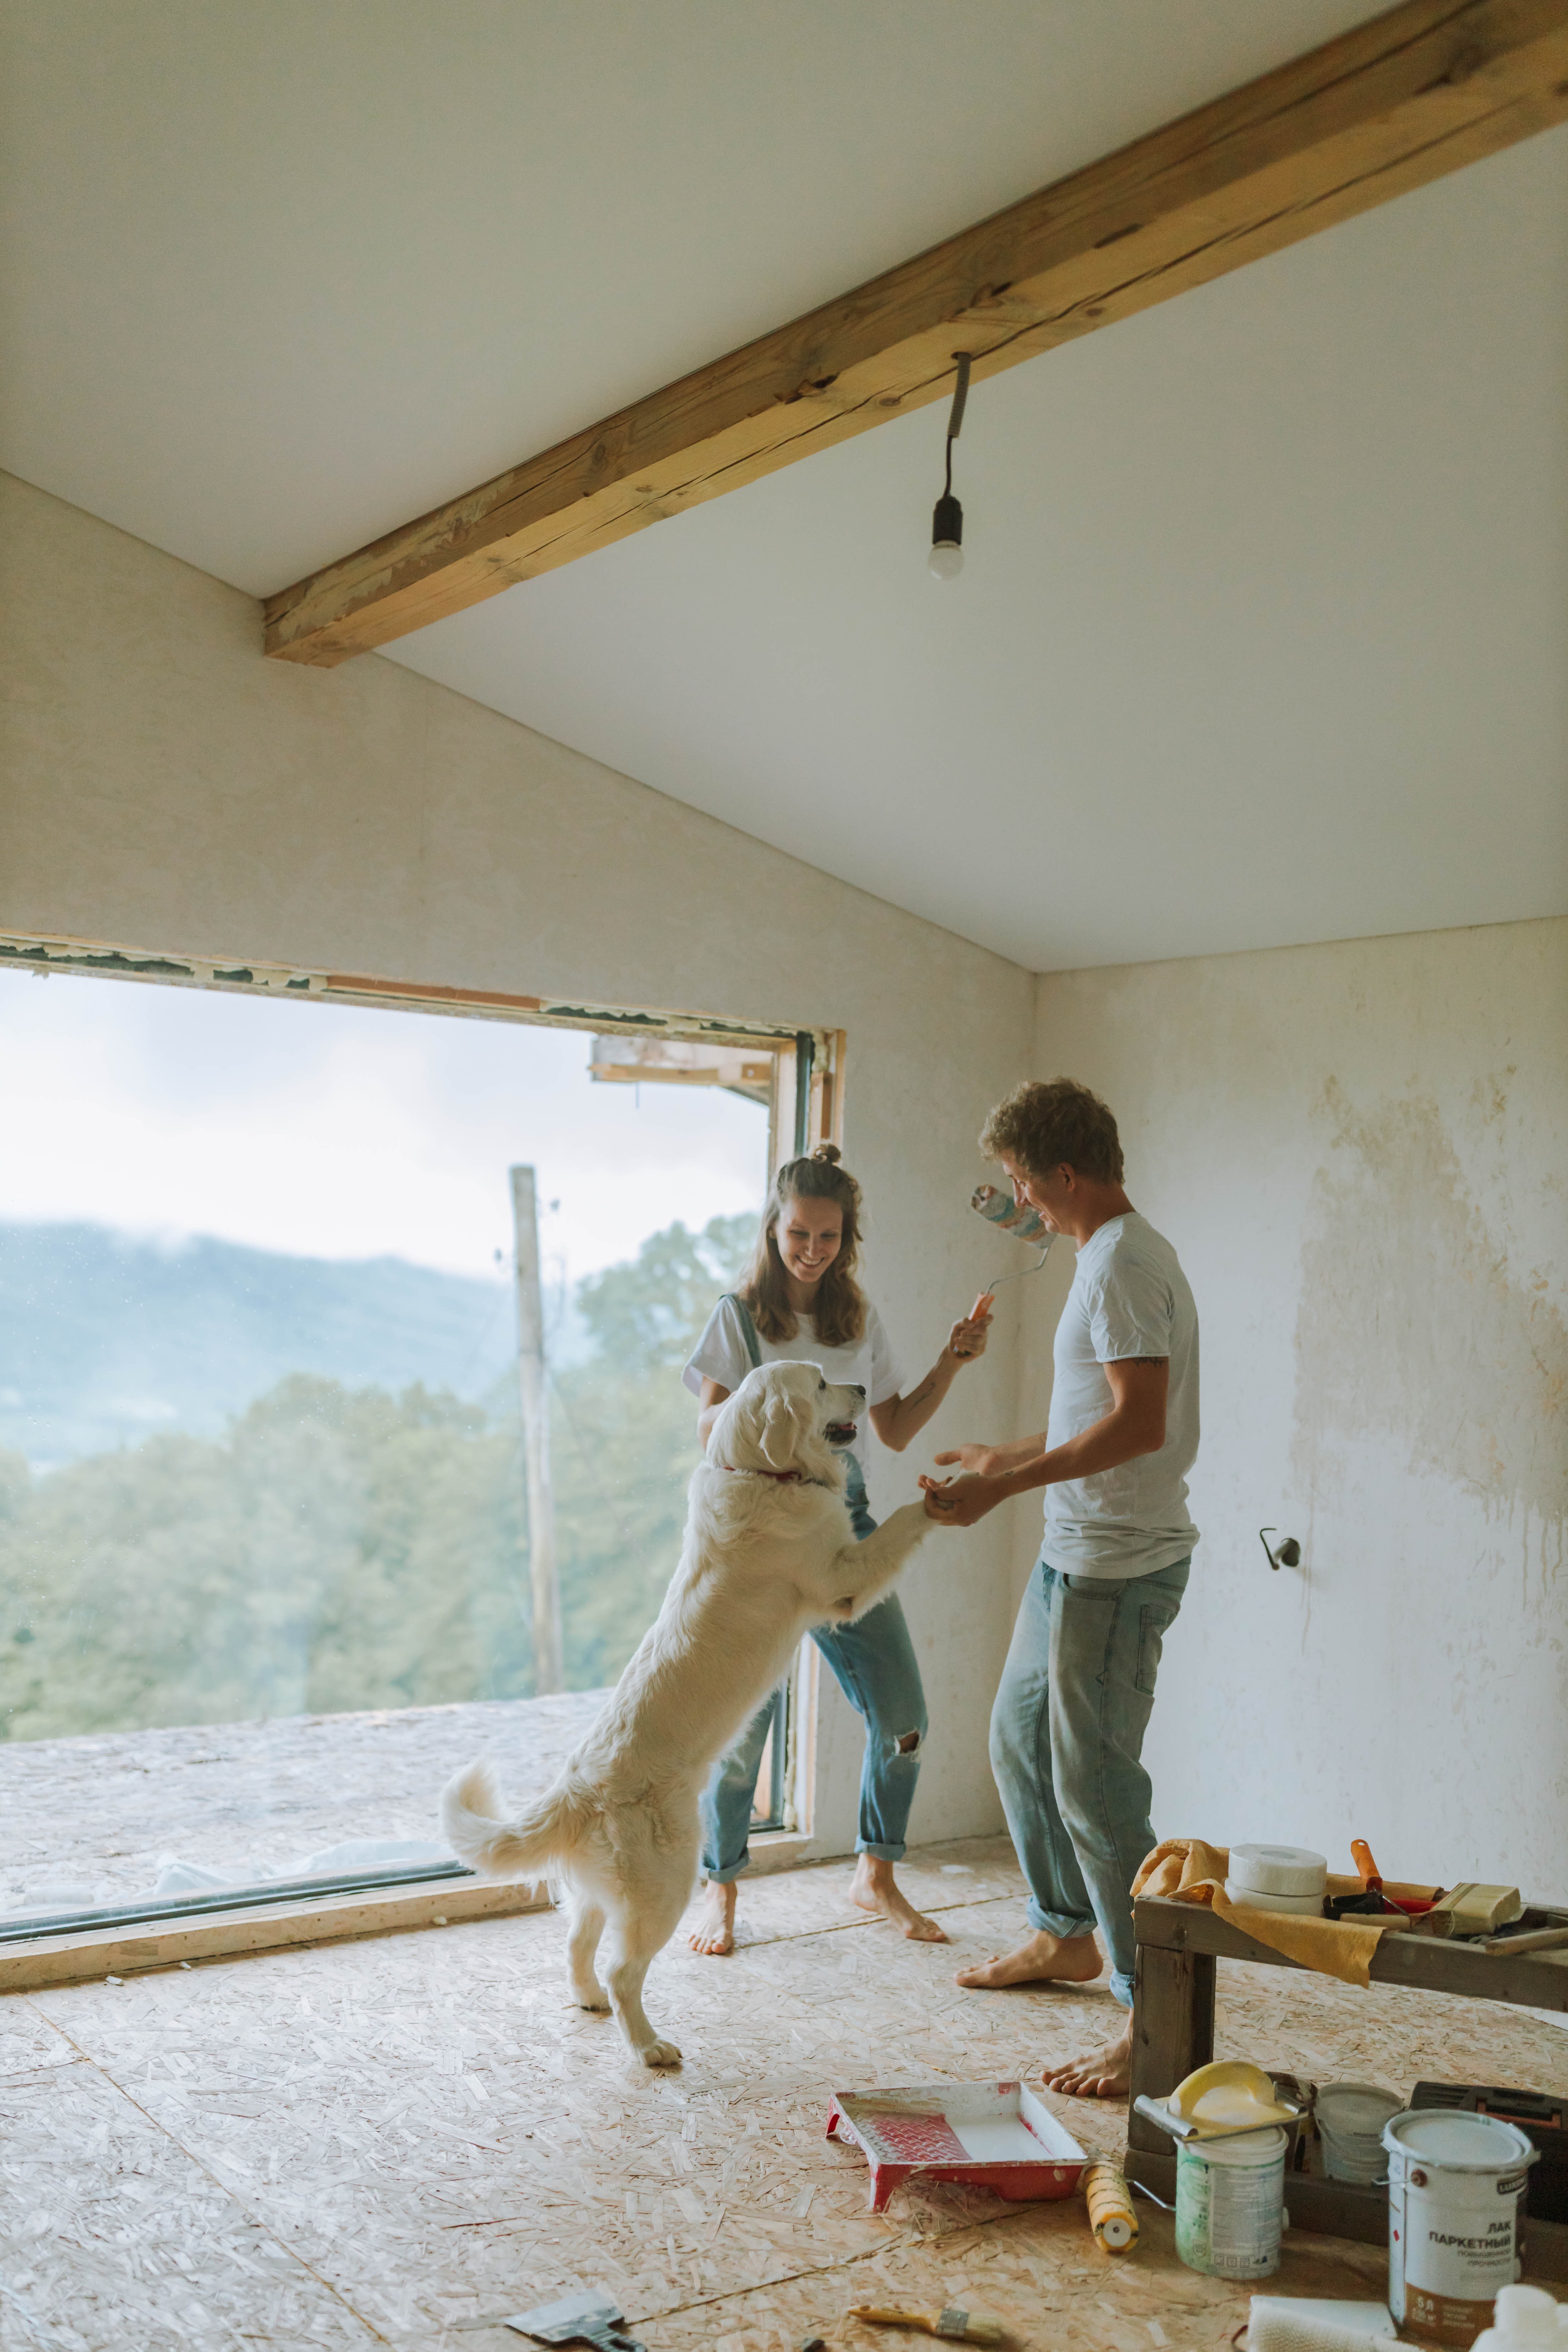 A couple playing with their dog. | Source: Pexels